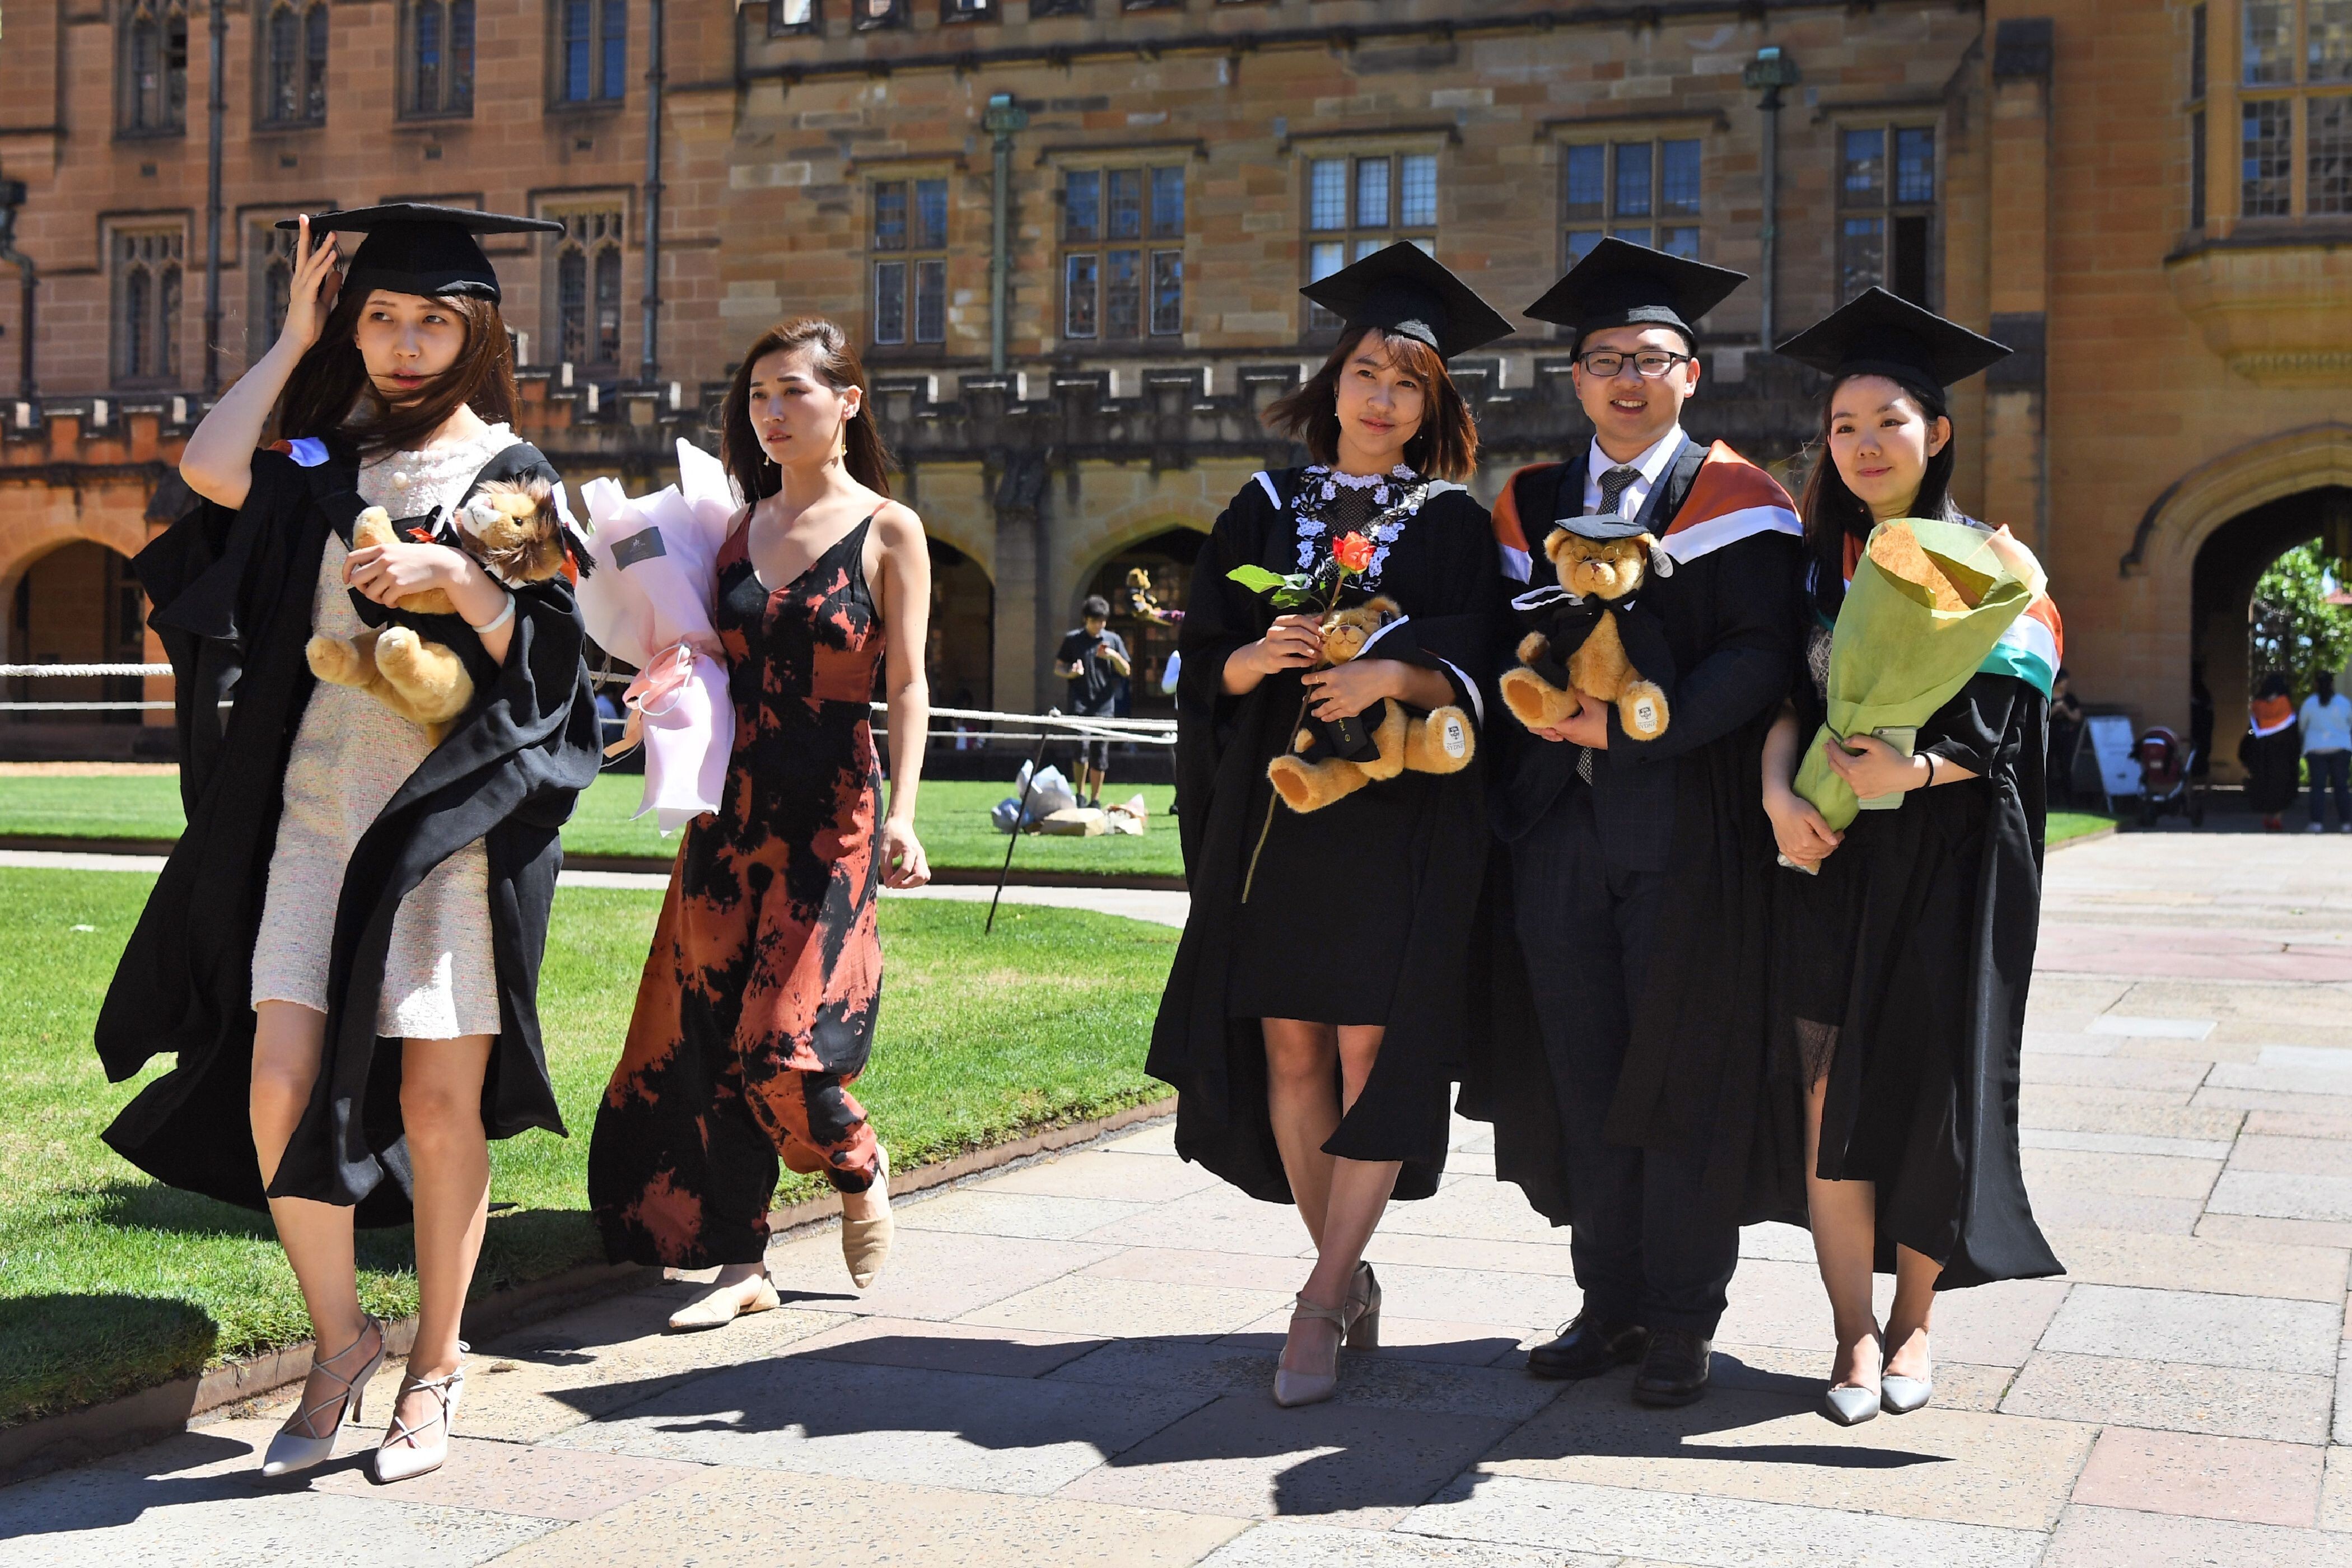 Students from China pose for family photos after graduating from a University of Sydney course in 2017. Photo: AFP